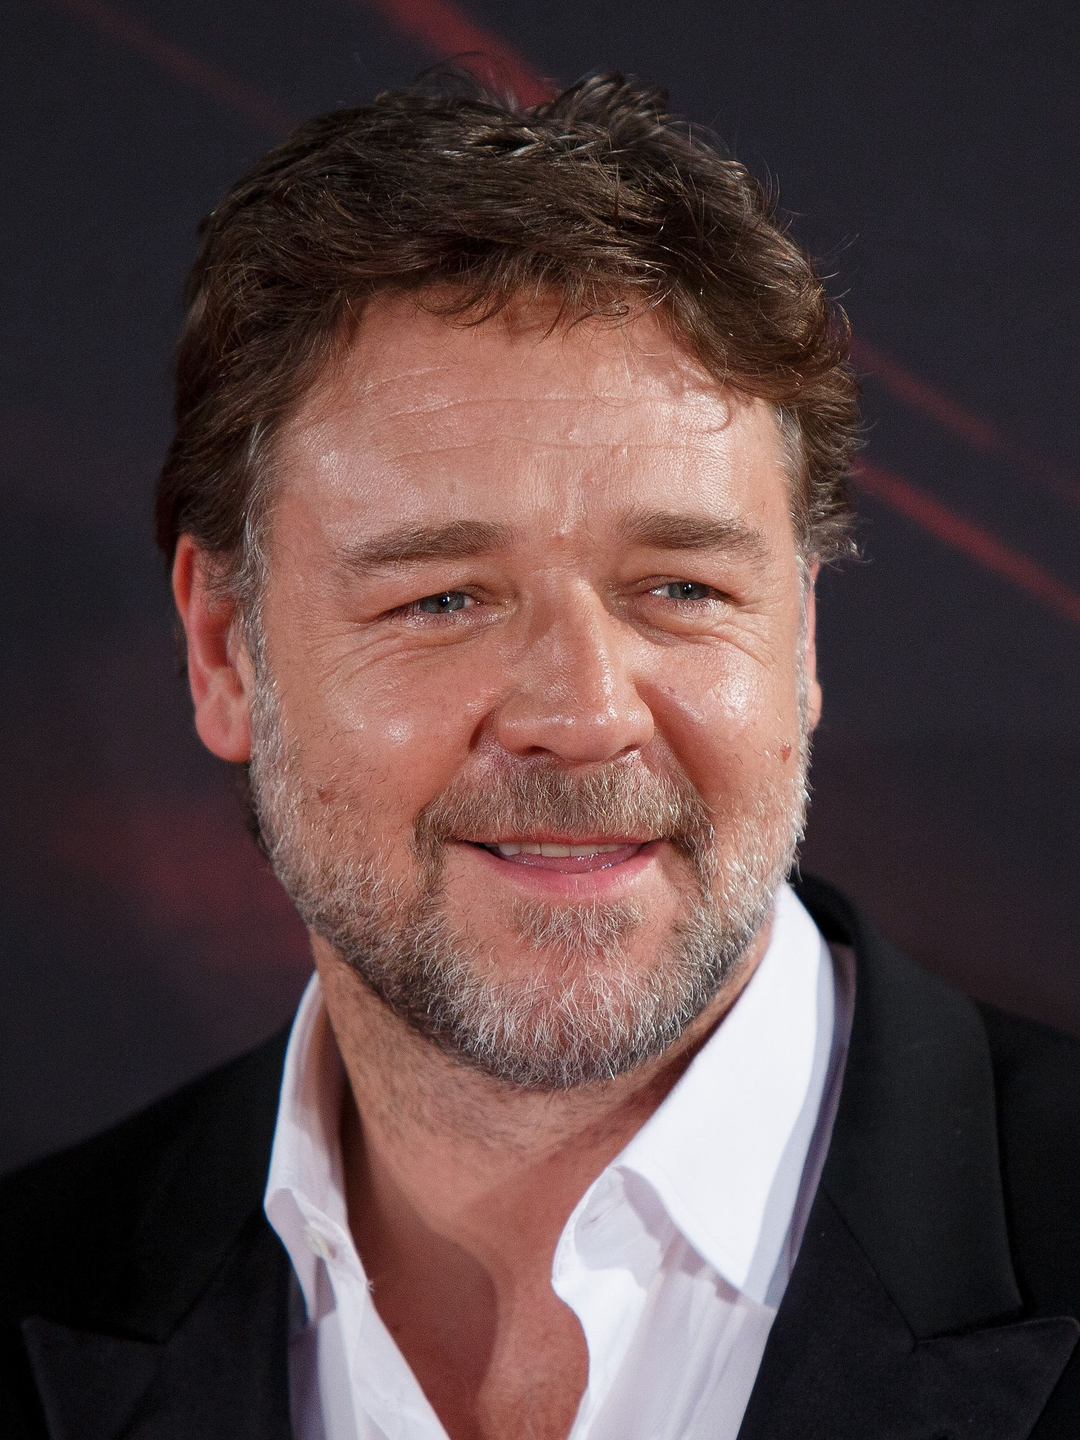 Russell Crowe in real life